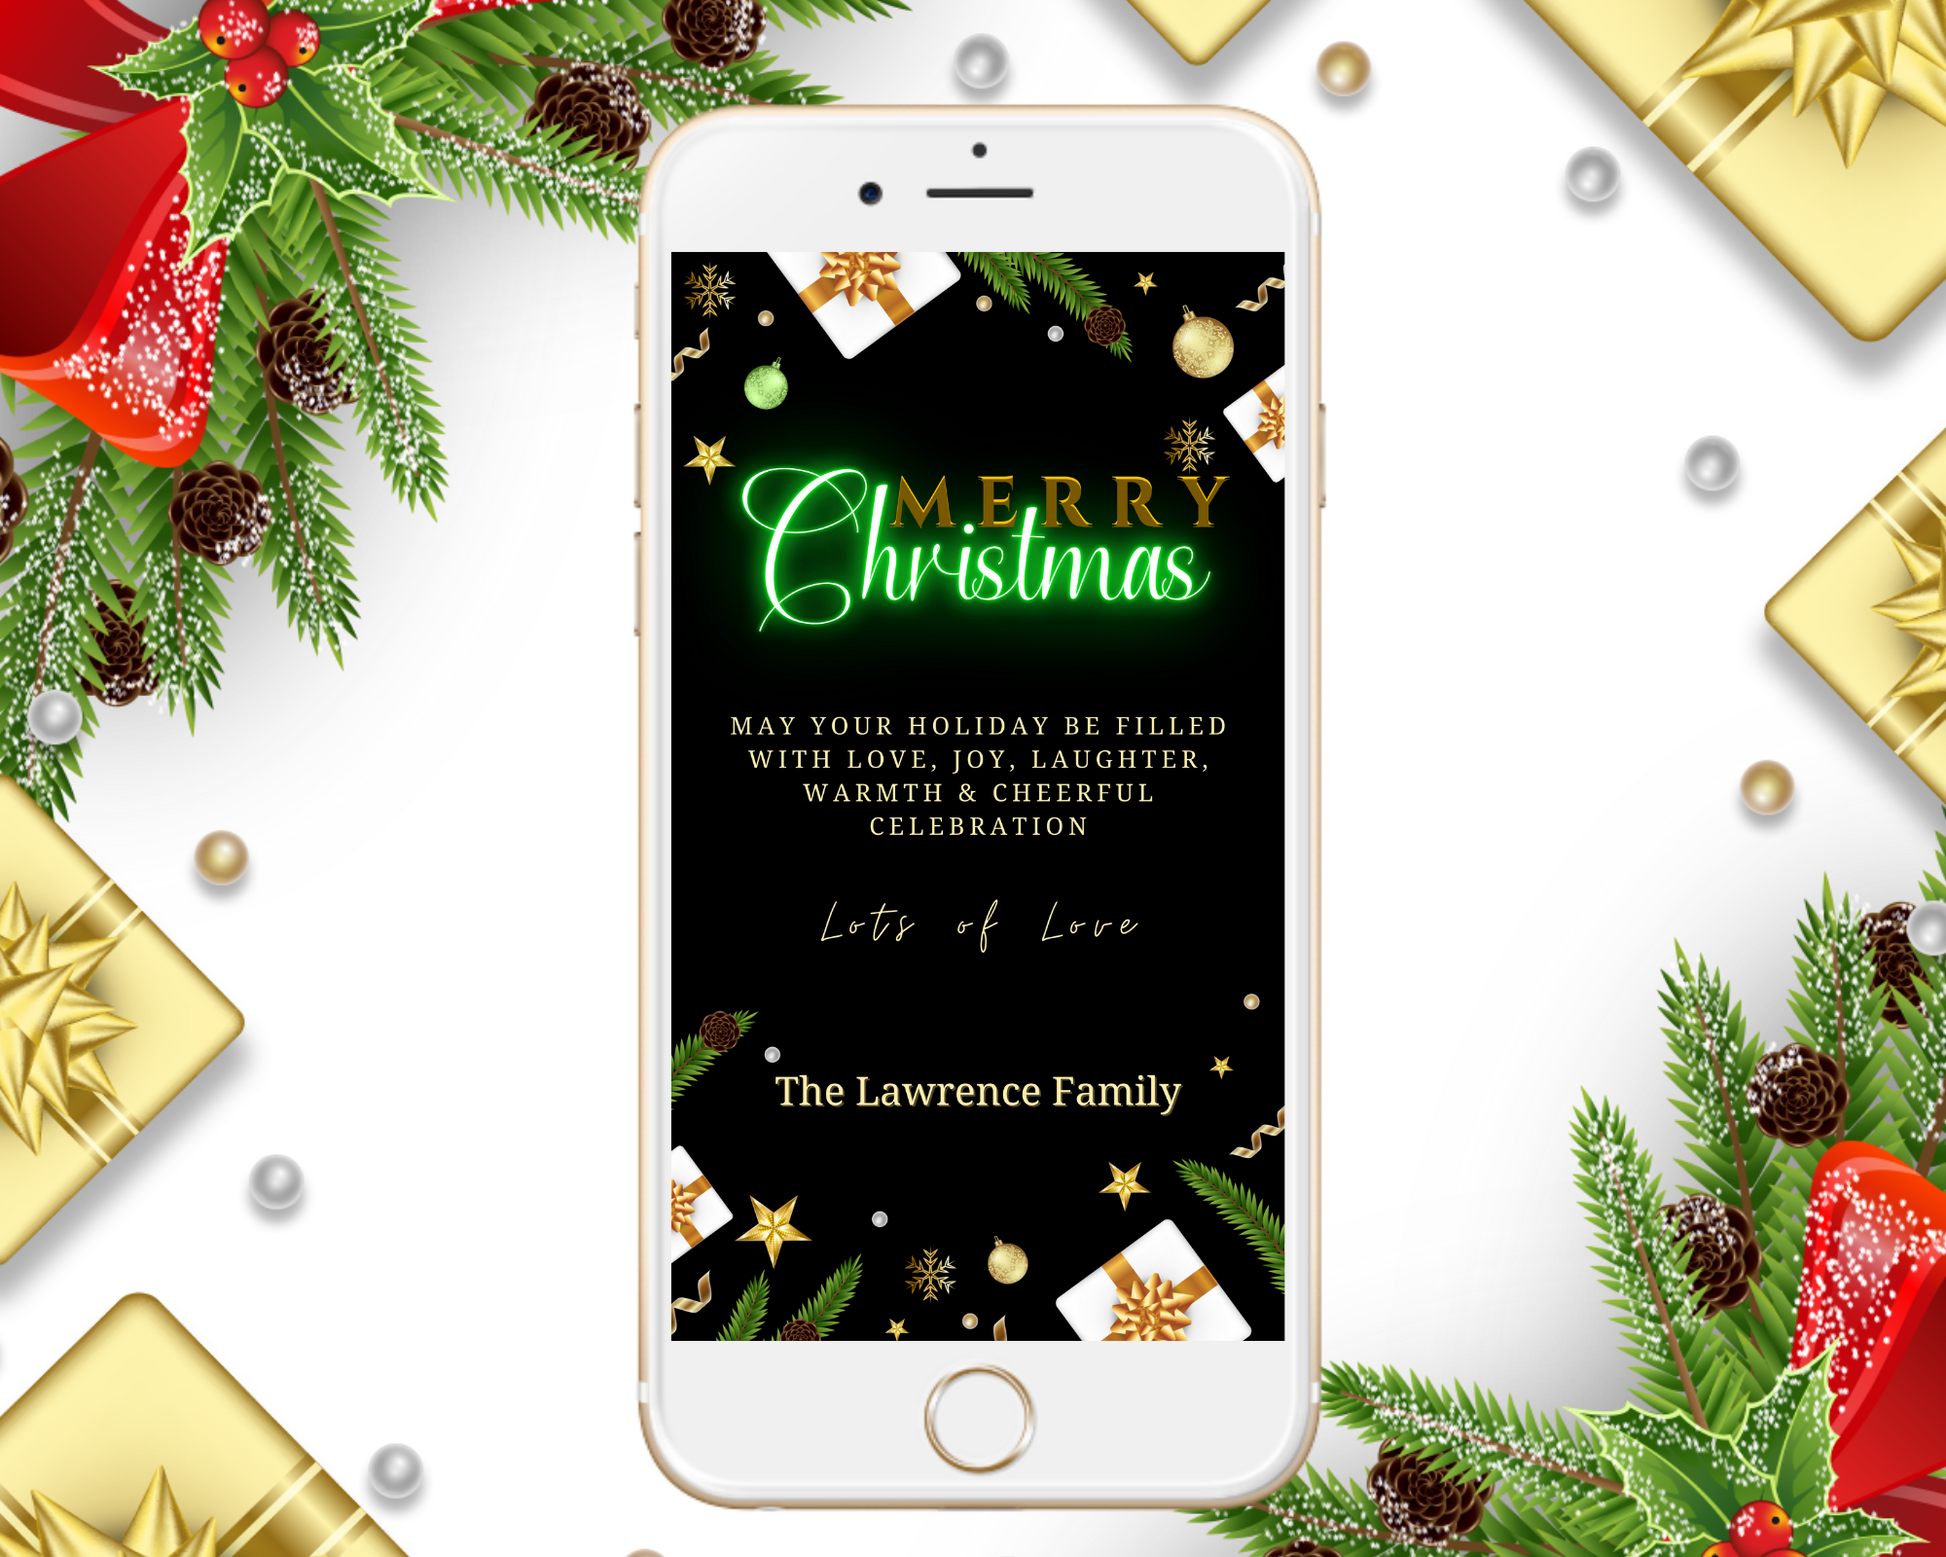 Green Neon Ornaments & Presents Merry Christmas Ecard on a smartphone screen with festive text and decorations.